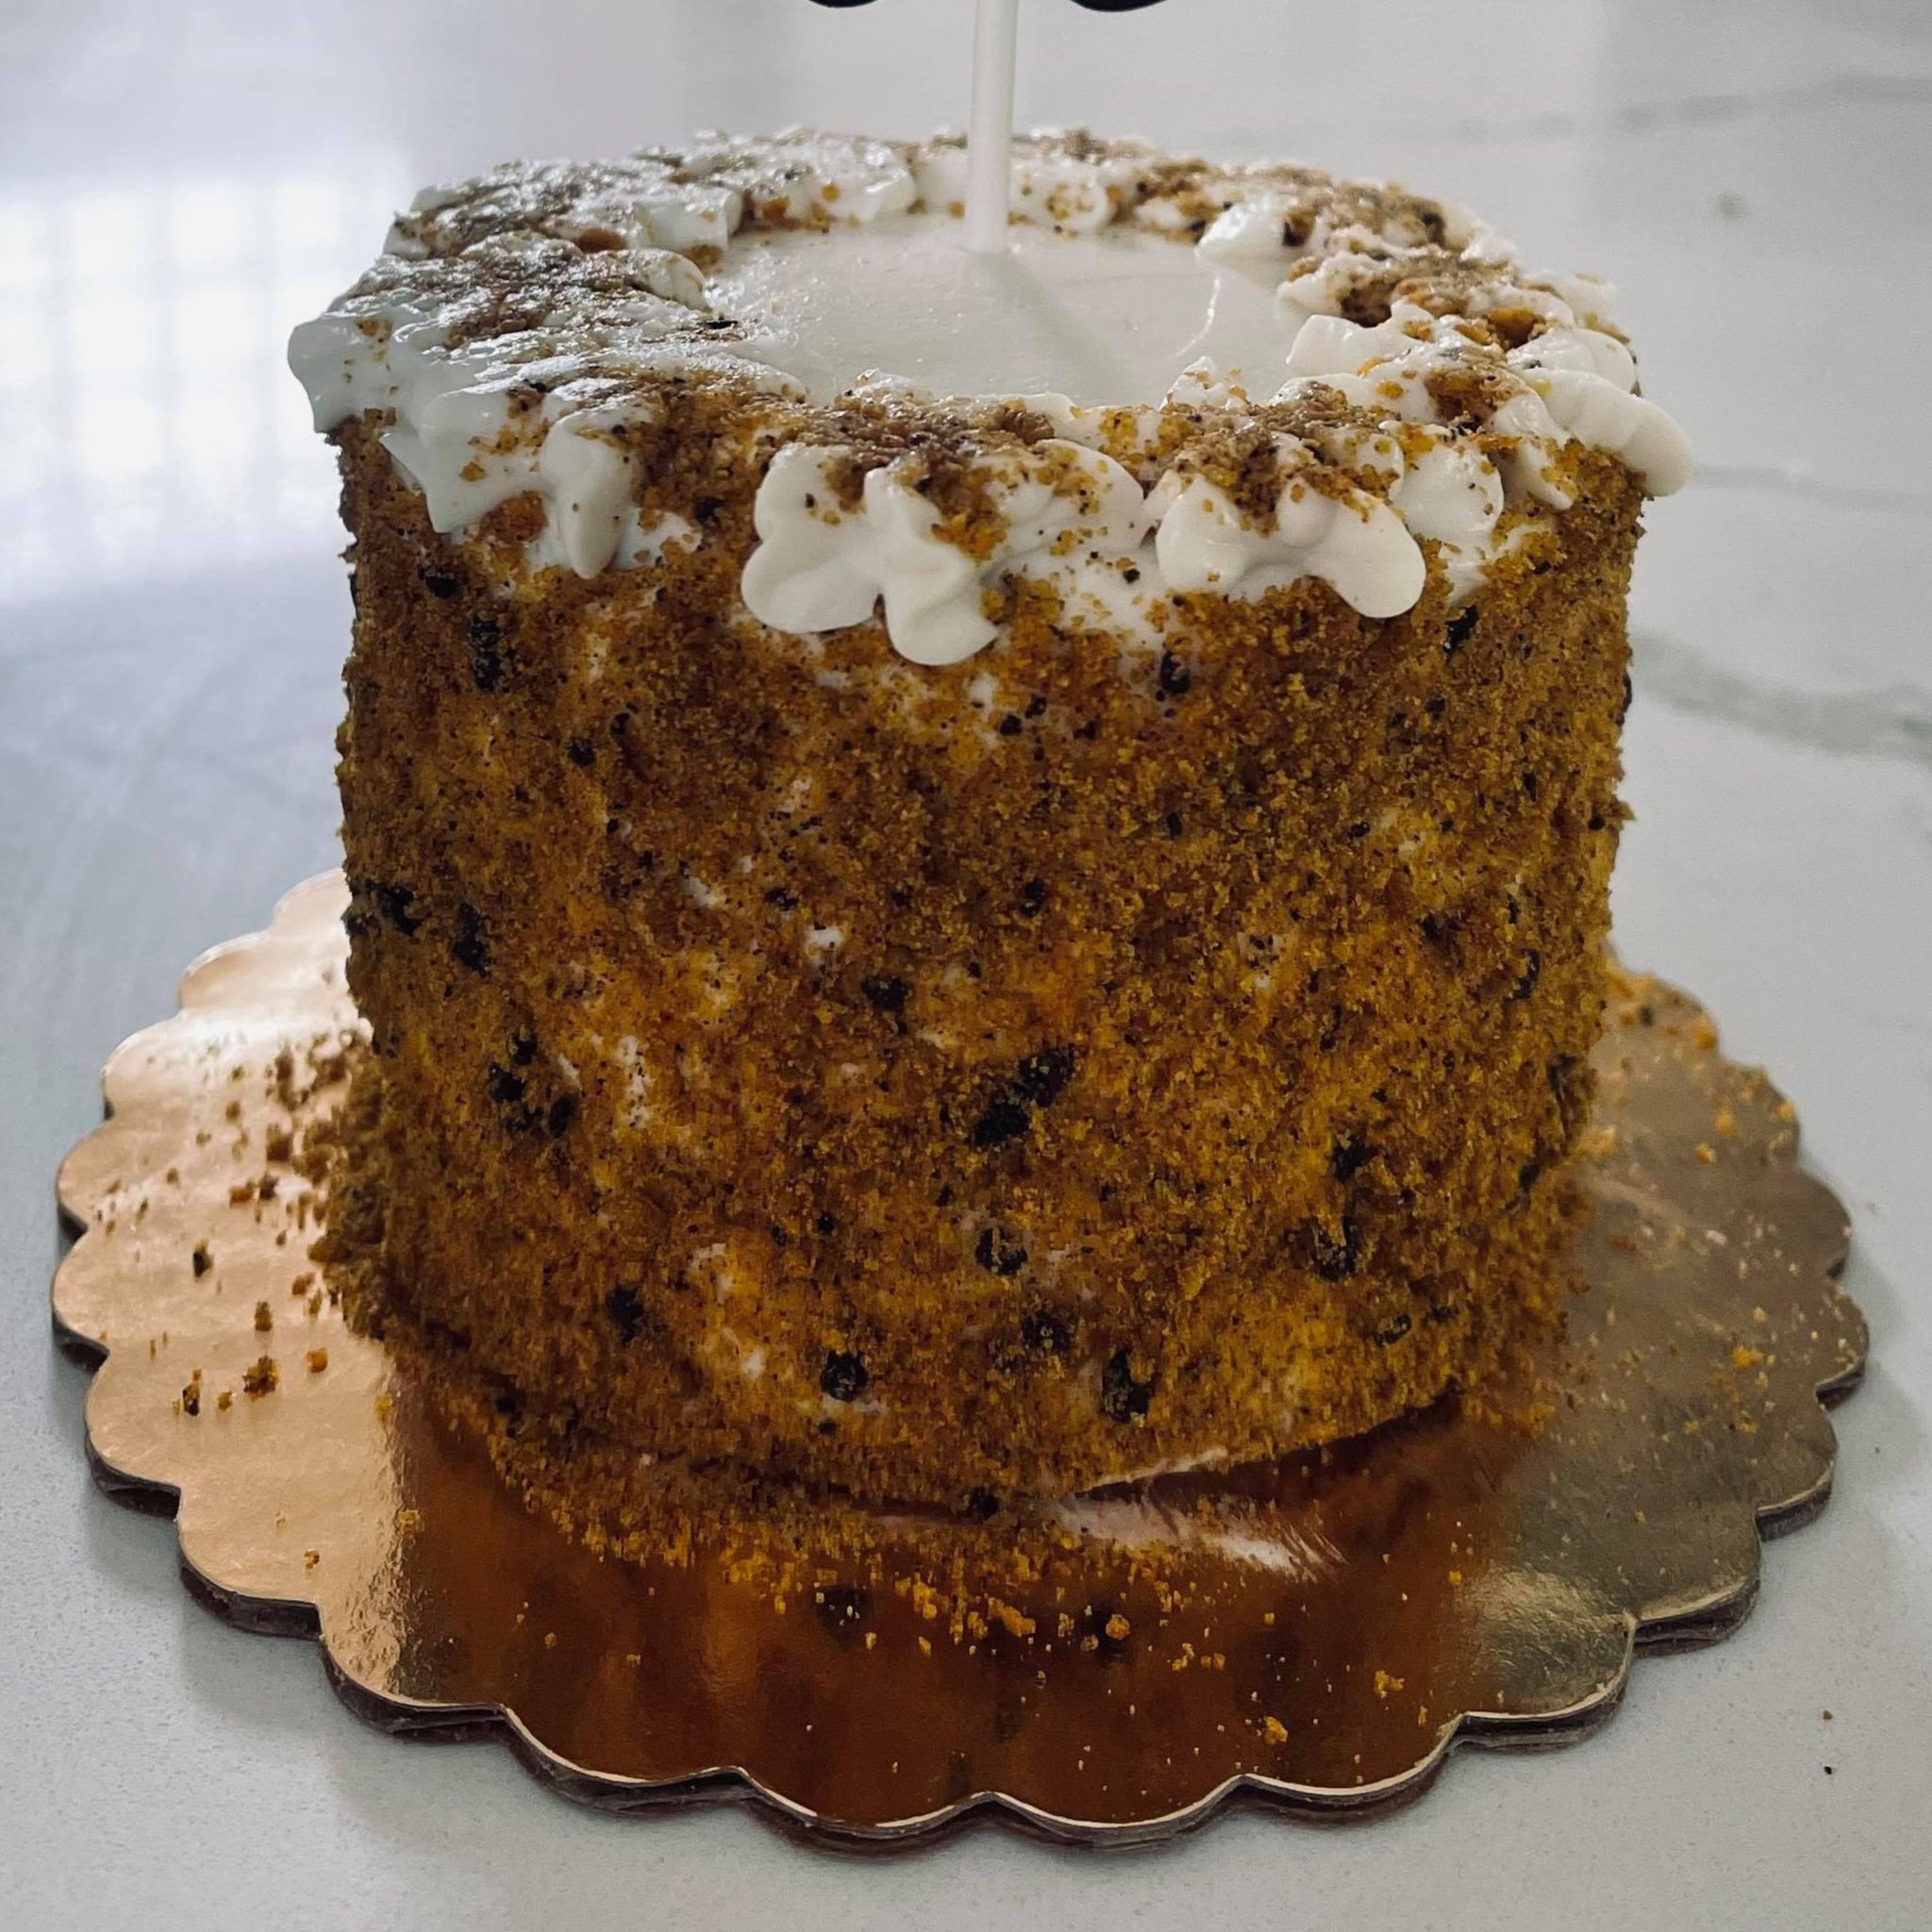 Chocolate Chip Cookie Cake with Brown Sugar Frosting - Cake by Courtney